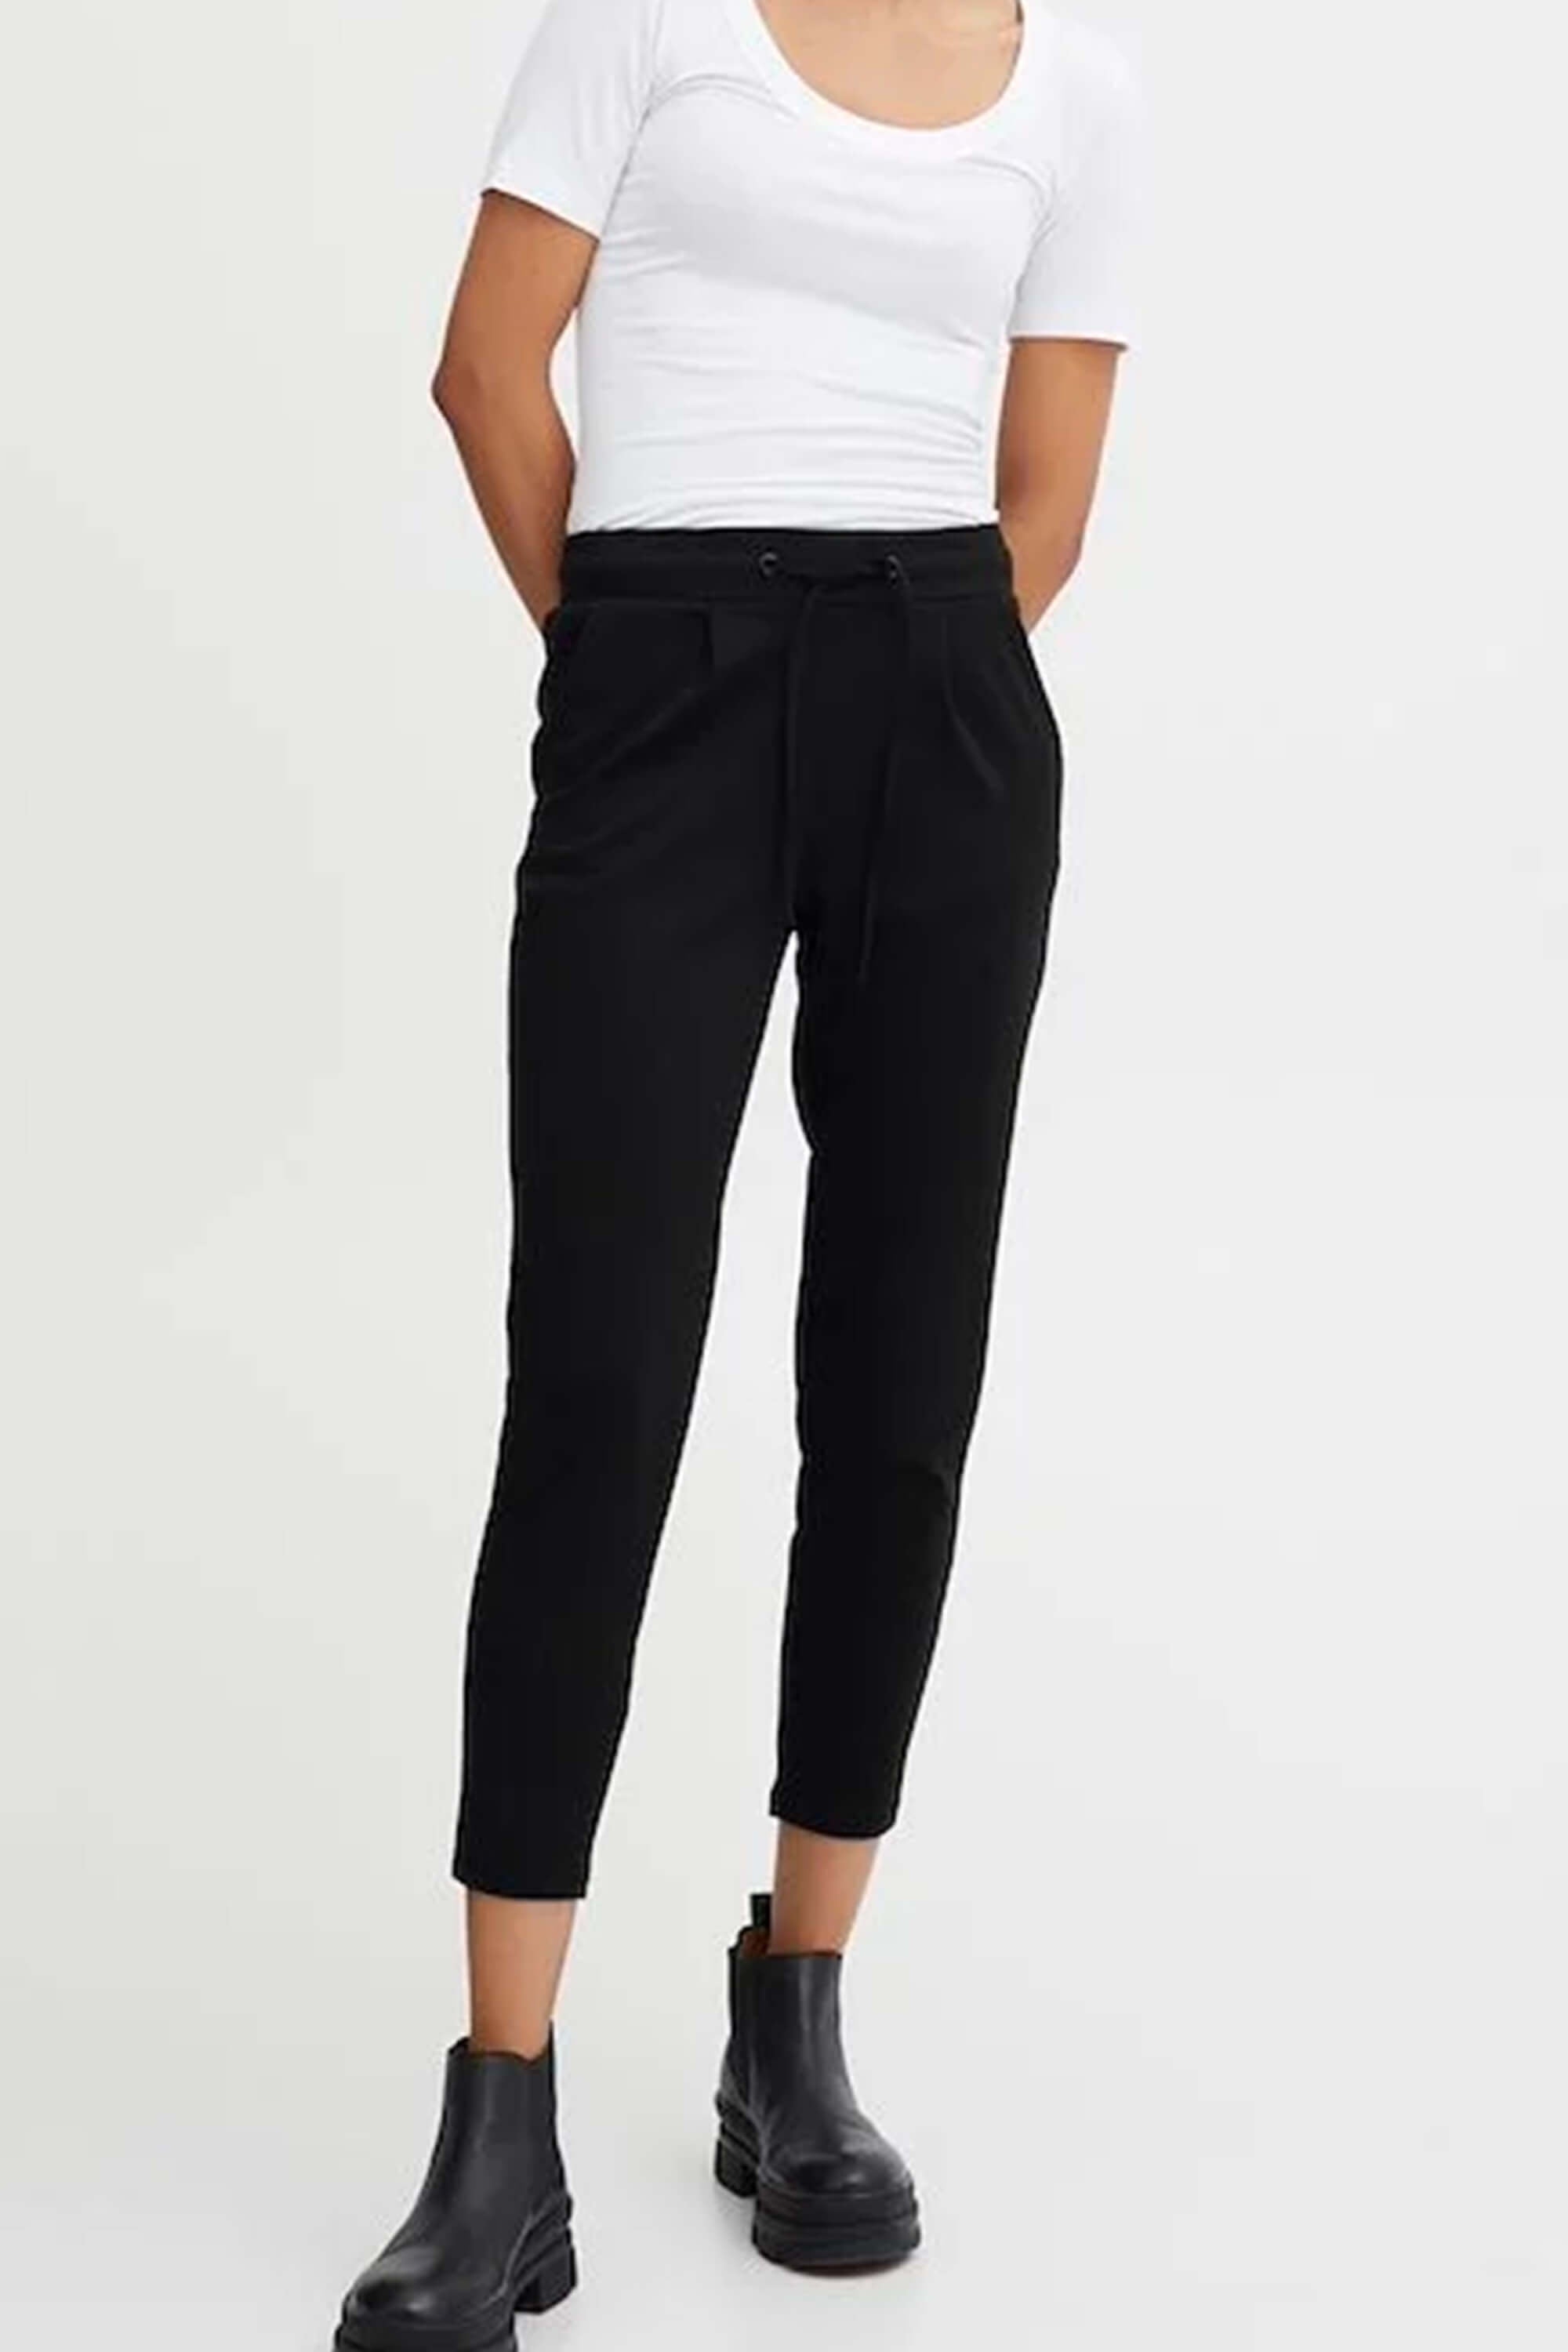 Ichi Kate Knitted Trousers Black